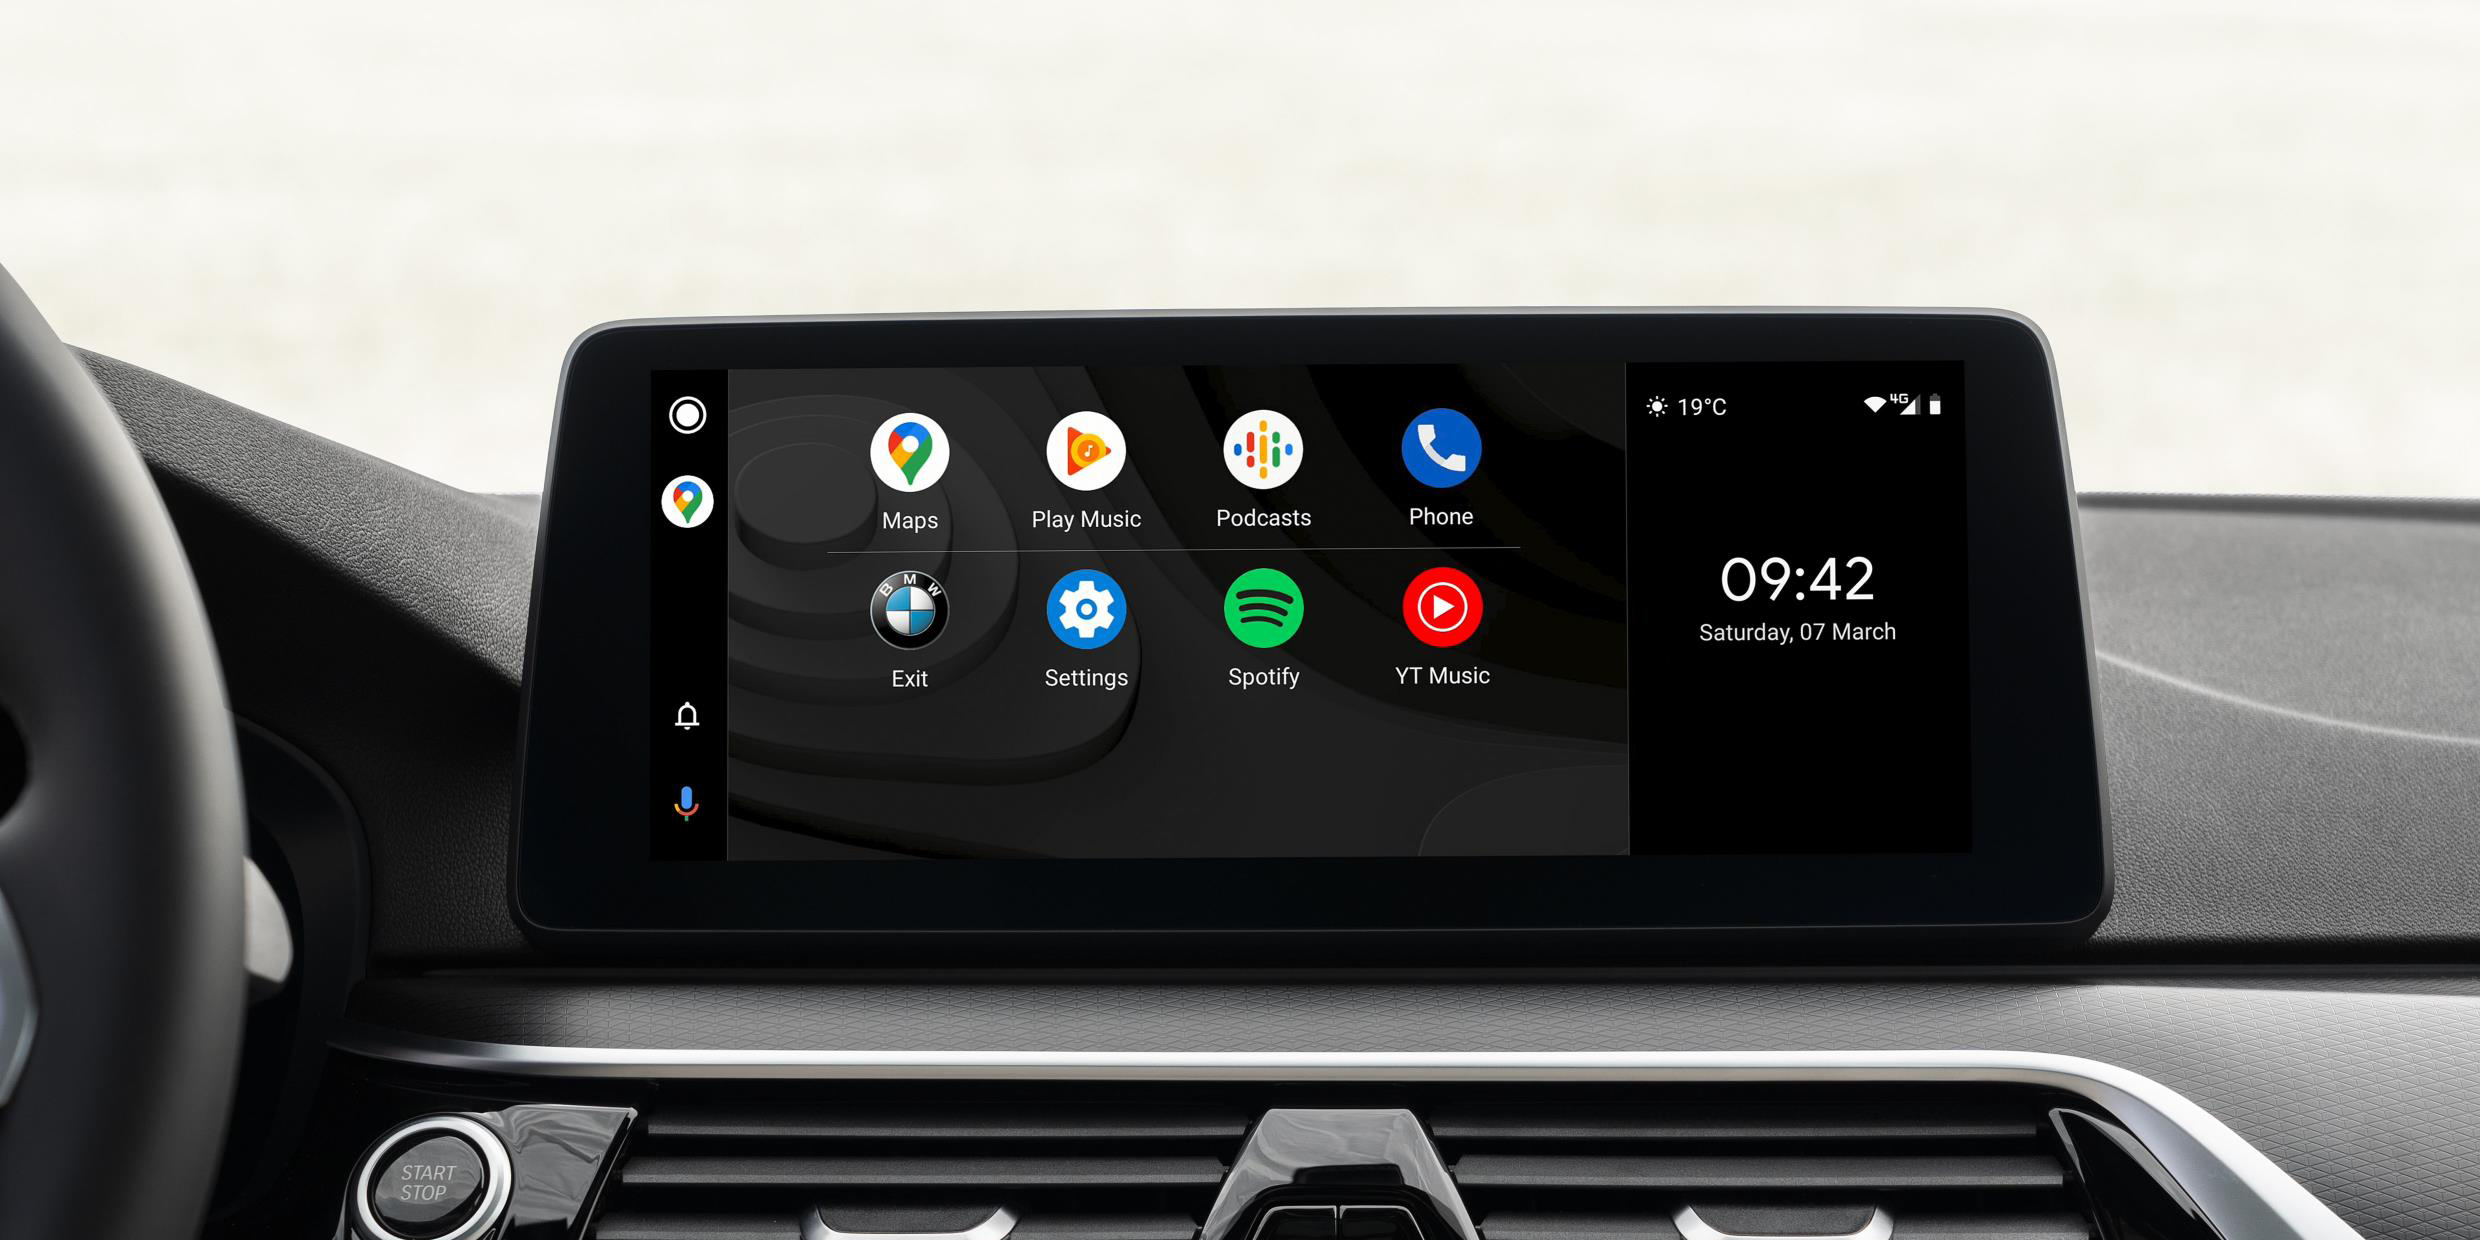 Wireless Android Auto with Google Maps is terrible - Android Authority